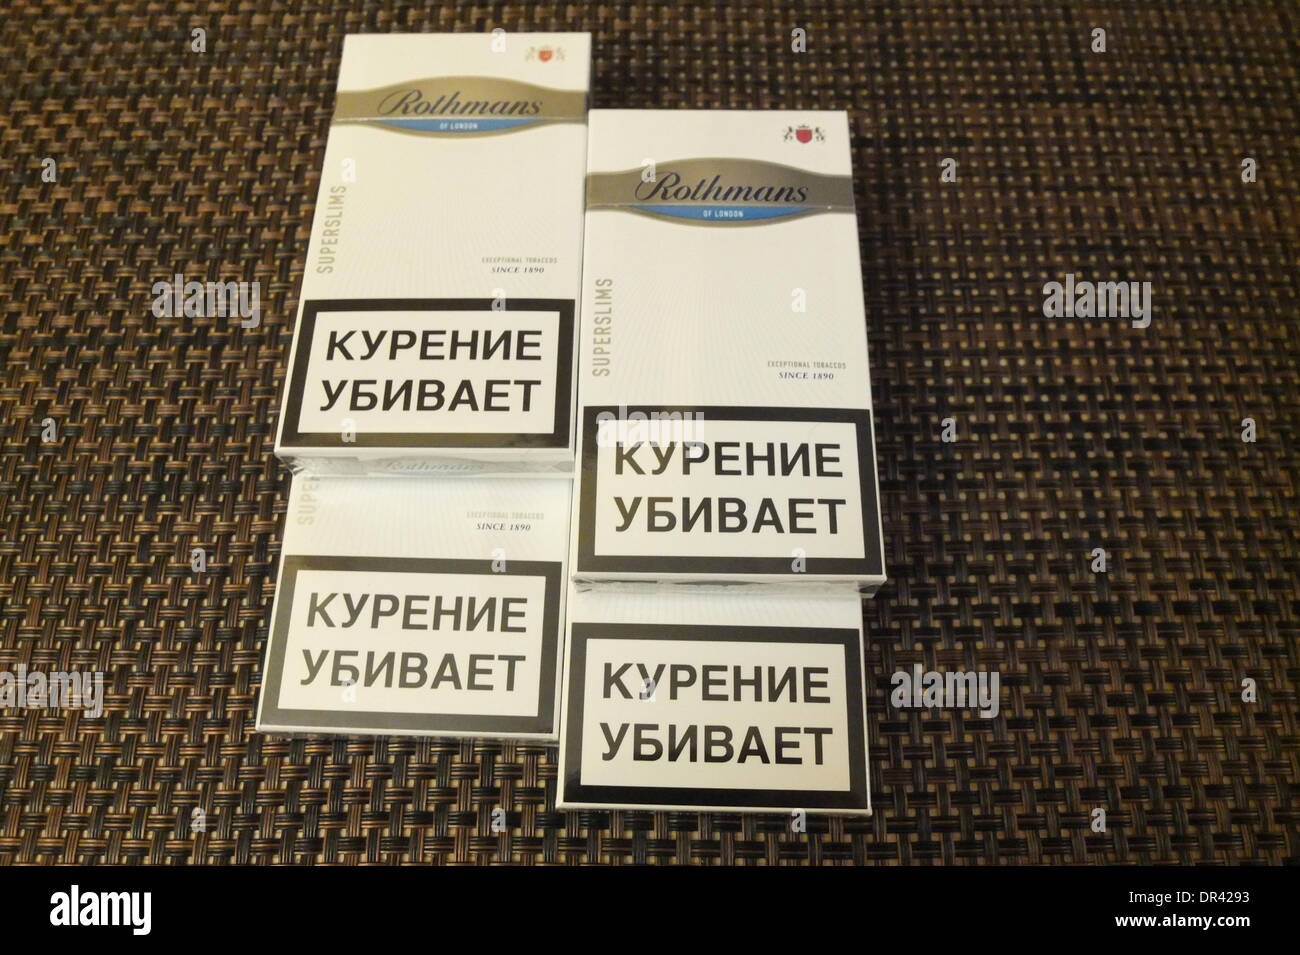 Kaliningrad, Russia 19th, January 2014  The EU's eastern border is the place of choice for cigarette smugglers, who can make easy profits from the price differences with Russia. A pack of premium cigarettes costs â‚¬5 in Belgium, â‚¬3 in Poland, and less than â‚¬1 in in Russia. Pictured: Rothmans cigrettes with Russian tax stamps. Stock Photo